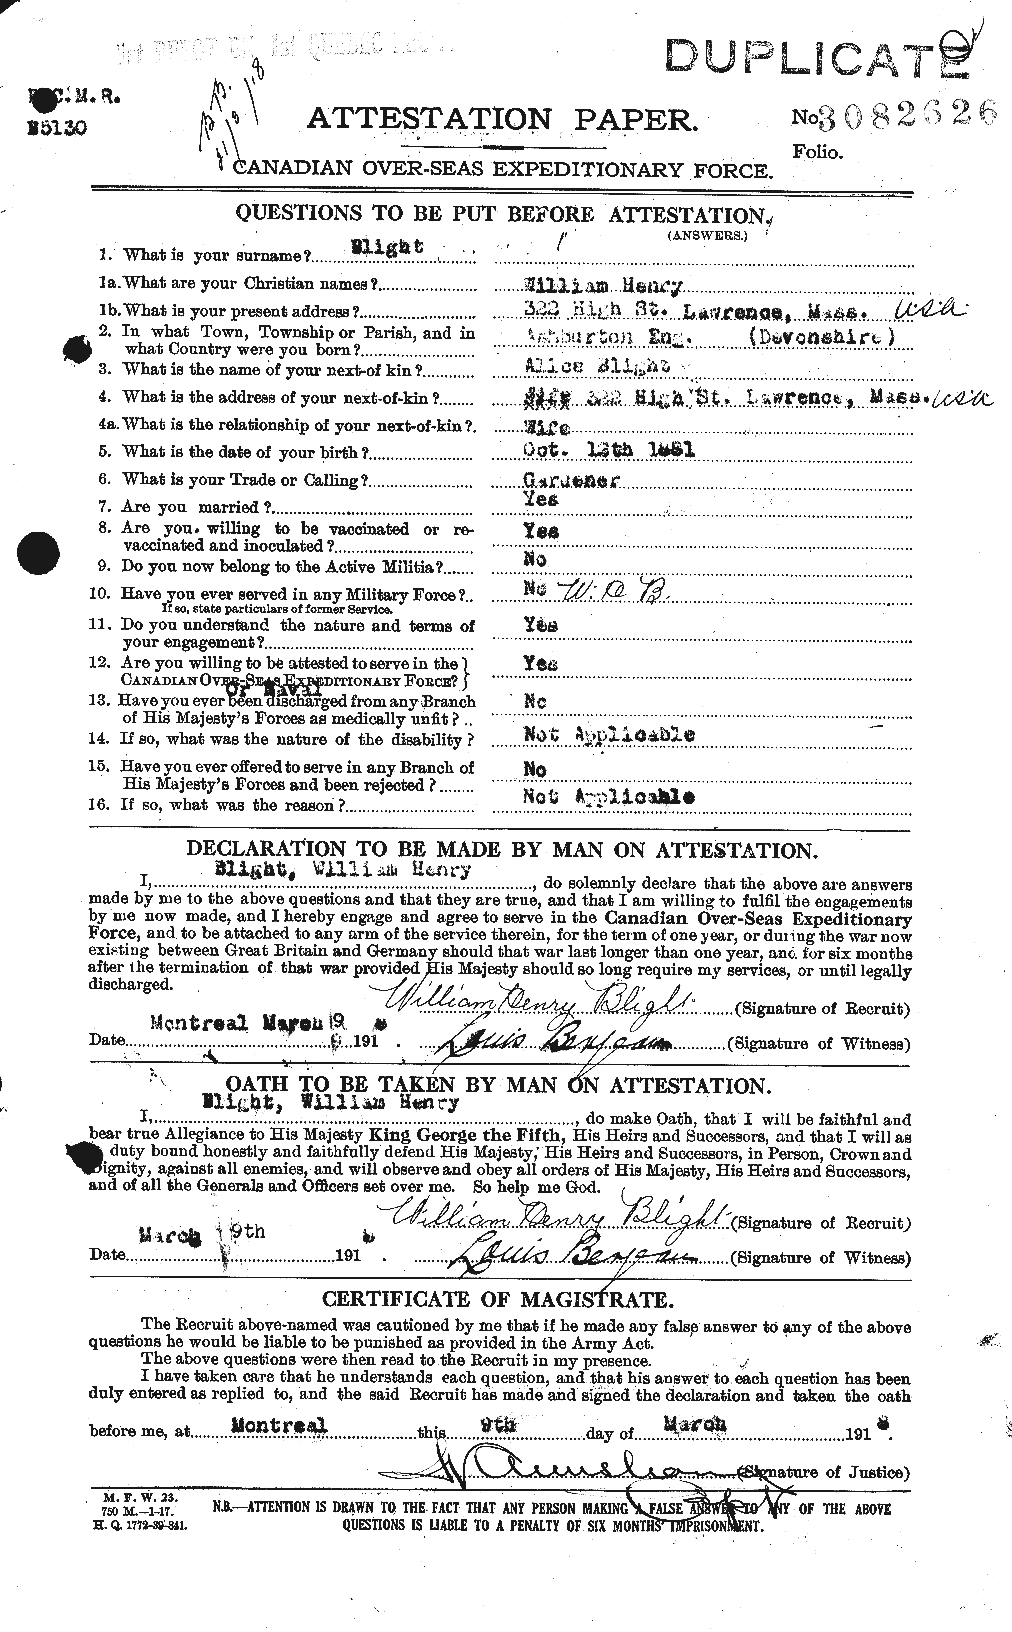 Personnel Records of the First World War - CEF 248099a